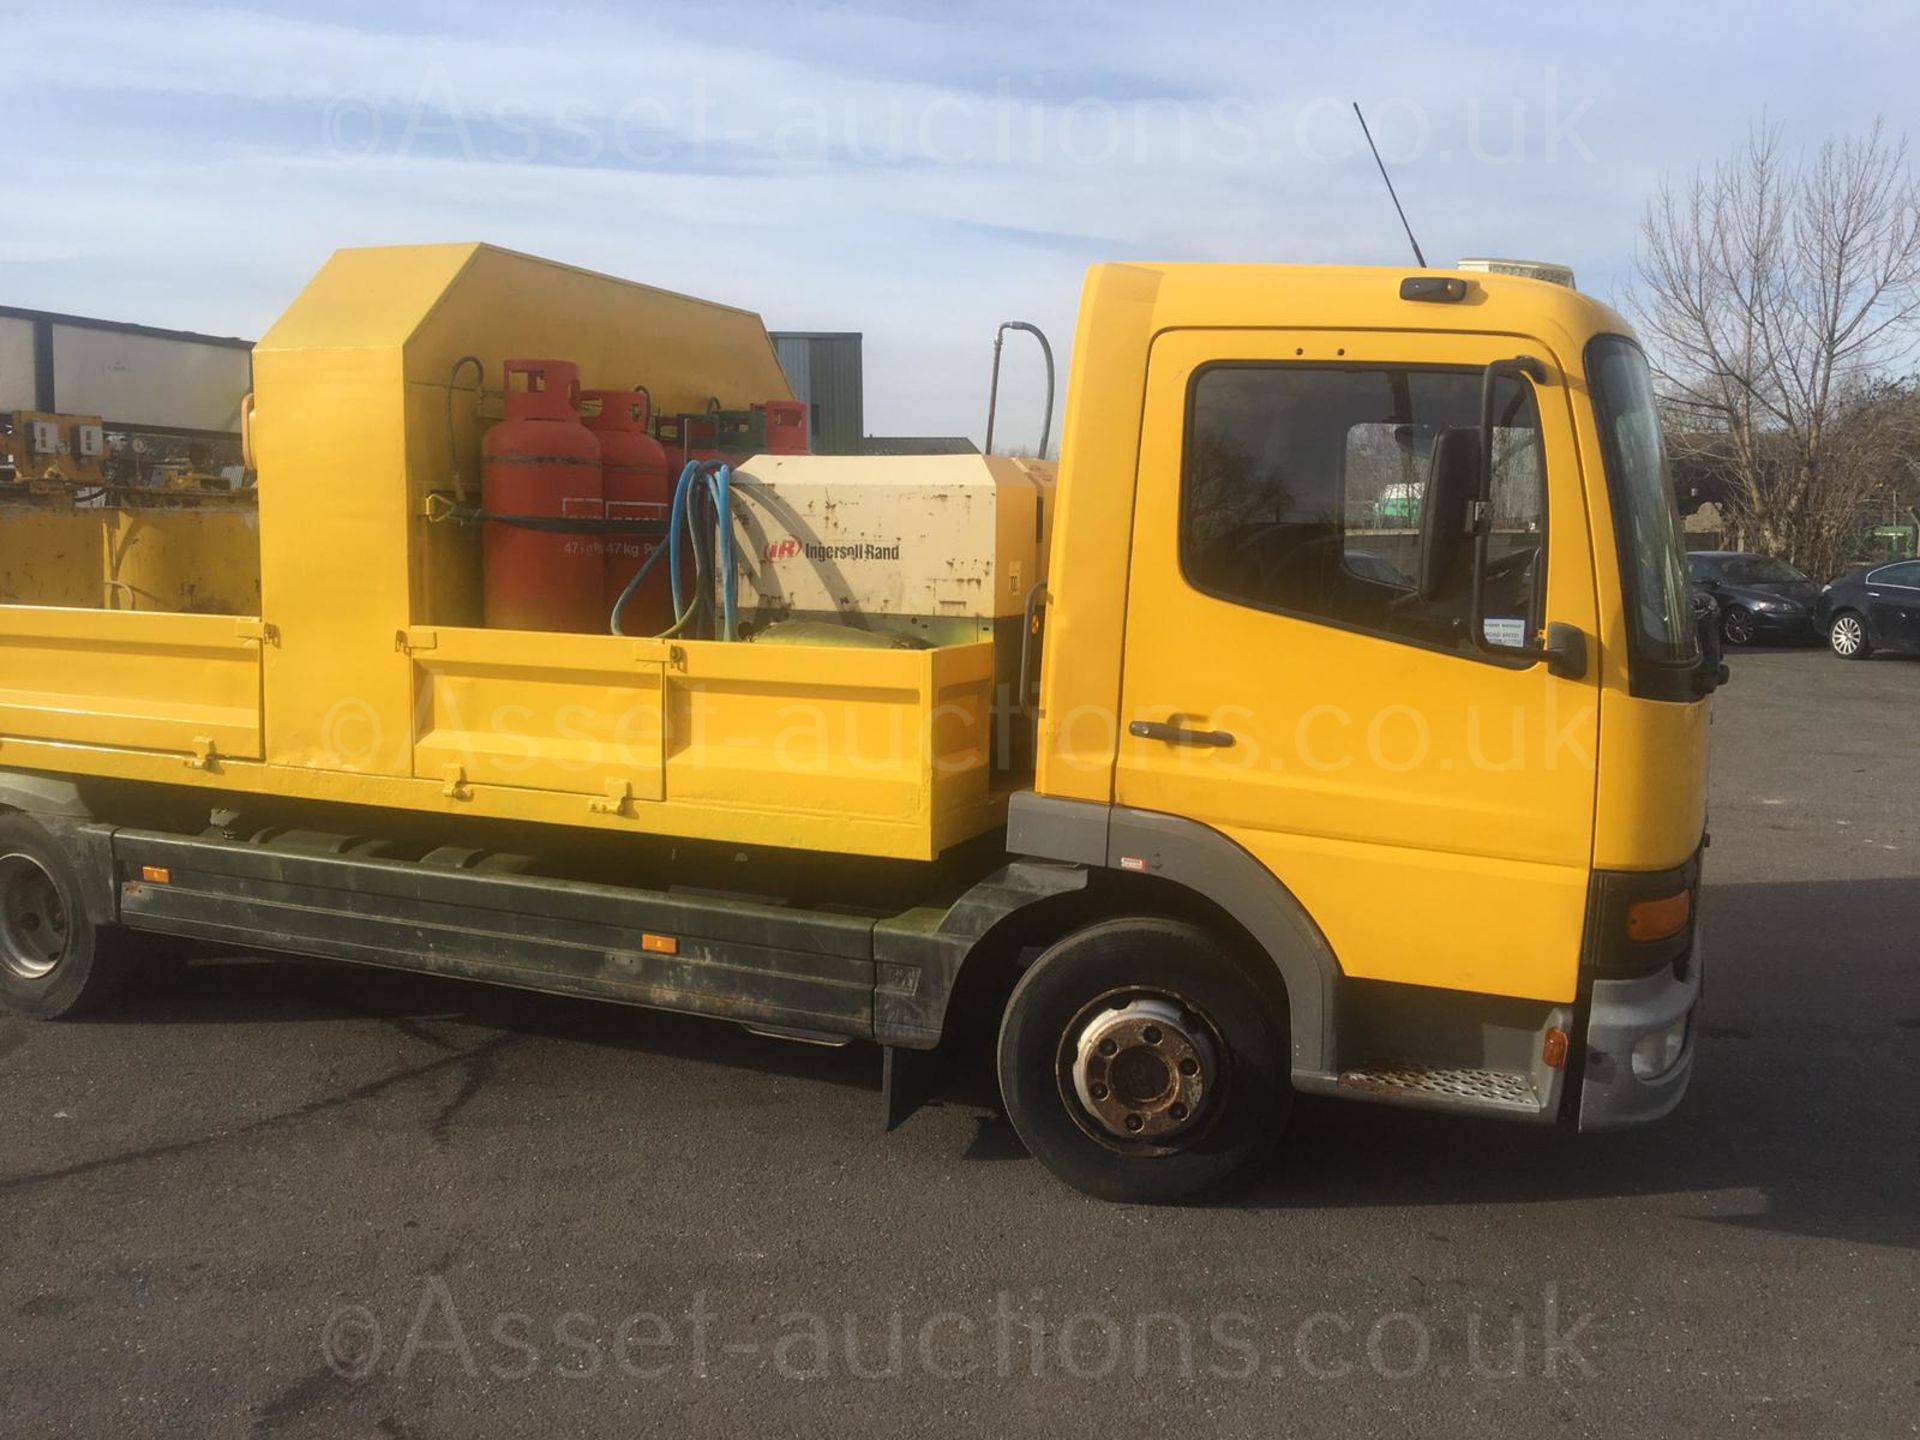 2004/54 REG MERCEDES ATEGO 1018 DAY YELLOW DROPSIDE LINE PAINTING LORRY 4.3L DIESEL ENGINE *NO VAT* - Image 3 of 62